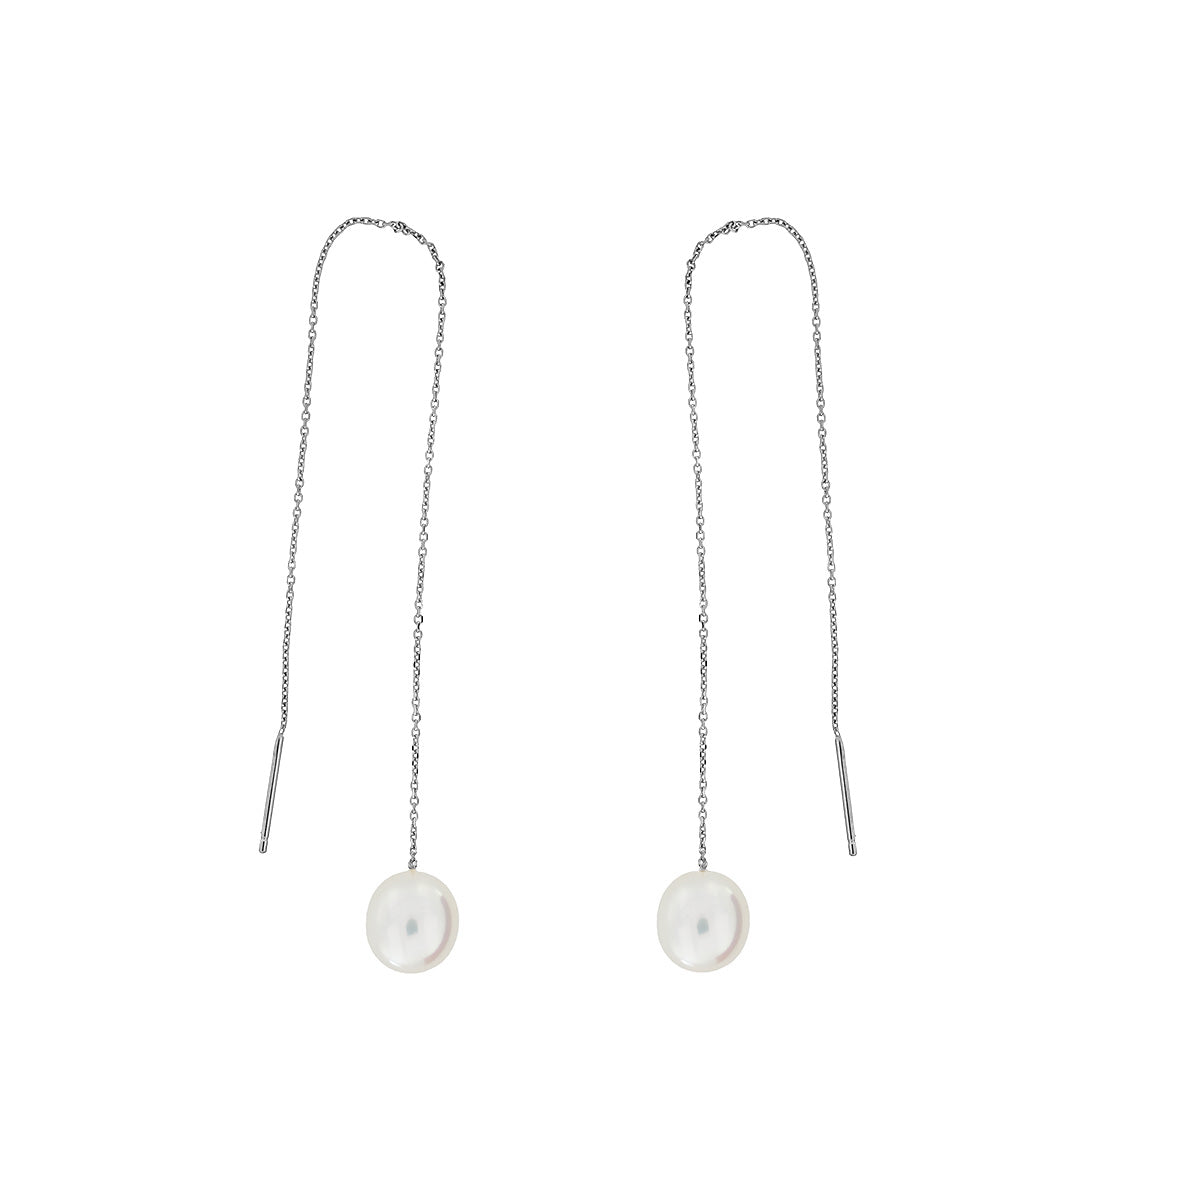 9 Carat White Gold Oval Pearl Pull-through Earrings